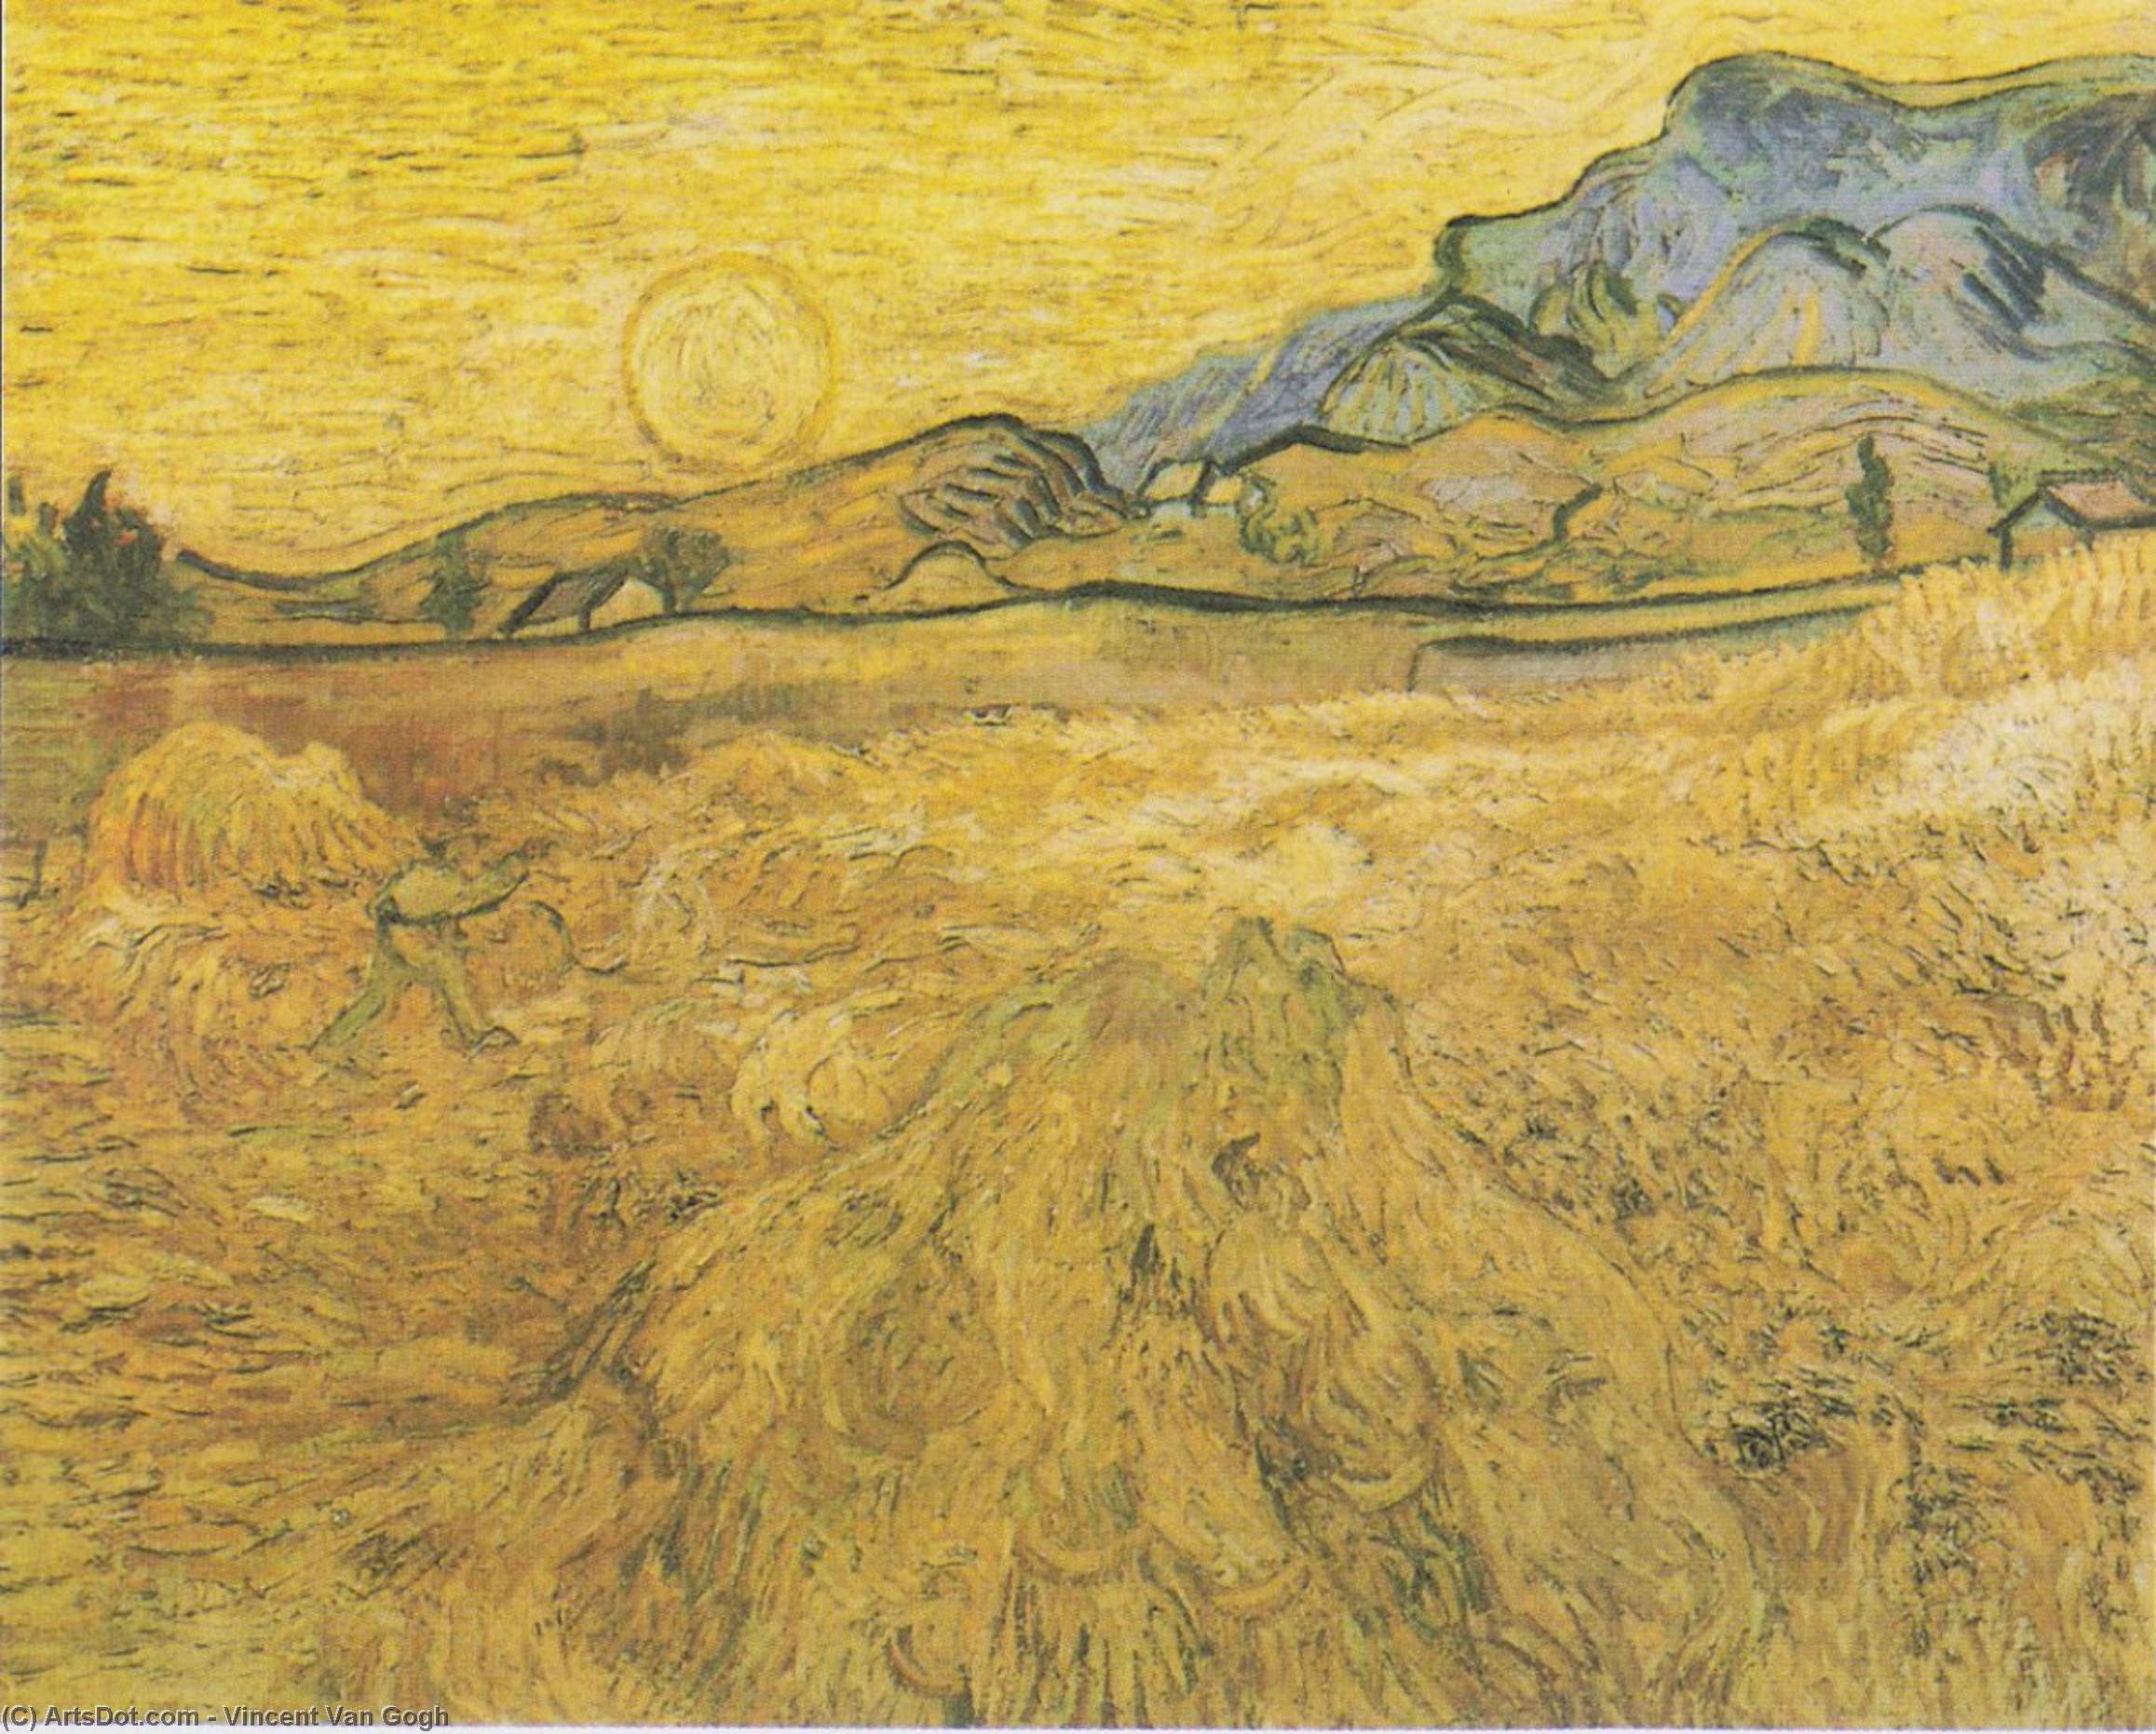 Wikioo.org - Encyklopedia Sztuk Pięknych - Malarstwo, Grafika Vincent Van Gogh - The Reaper (also known as Enclosed Field with Reaper)